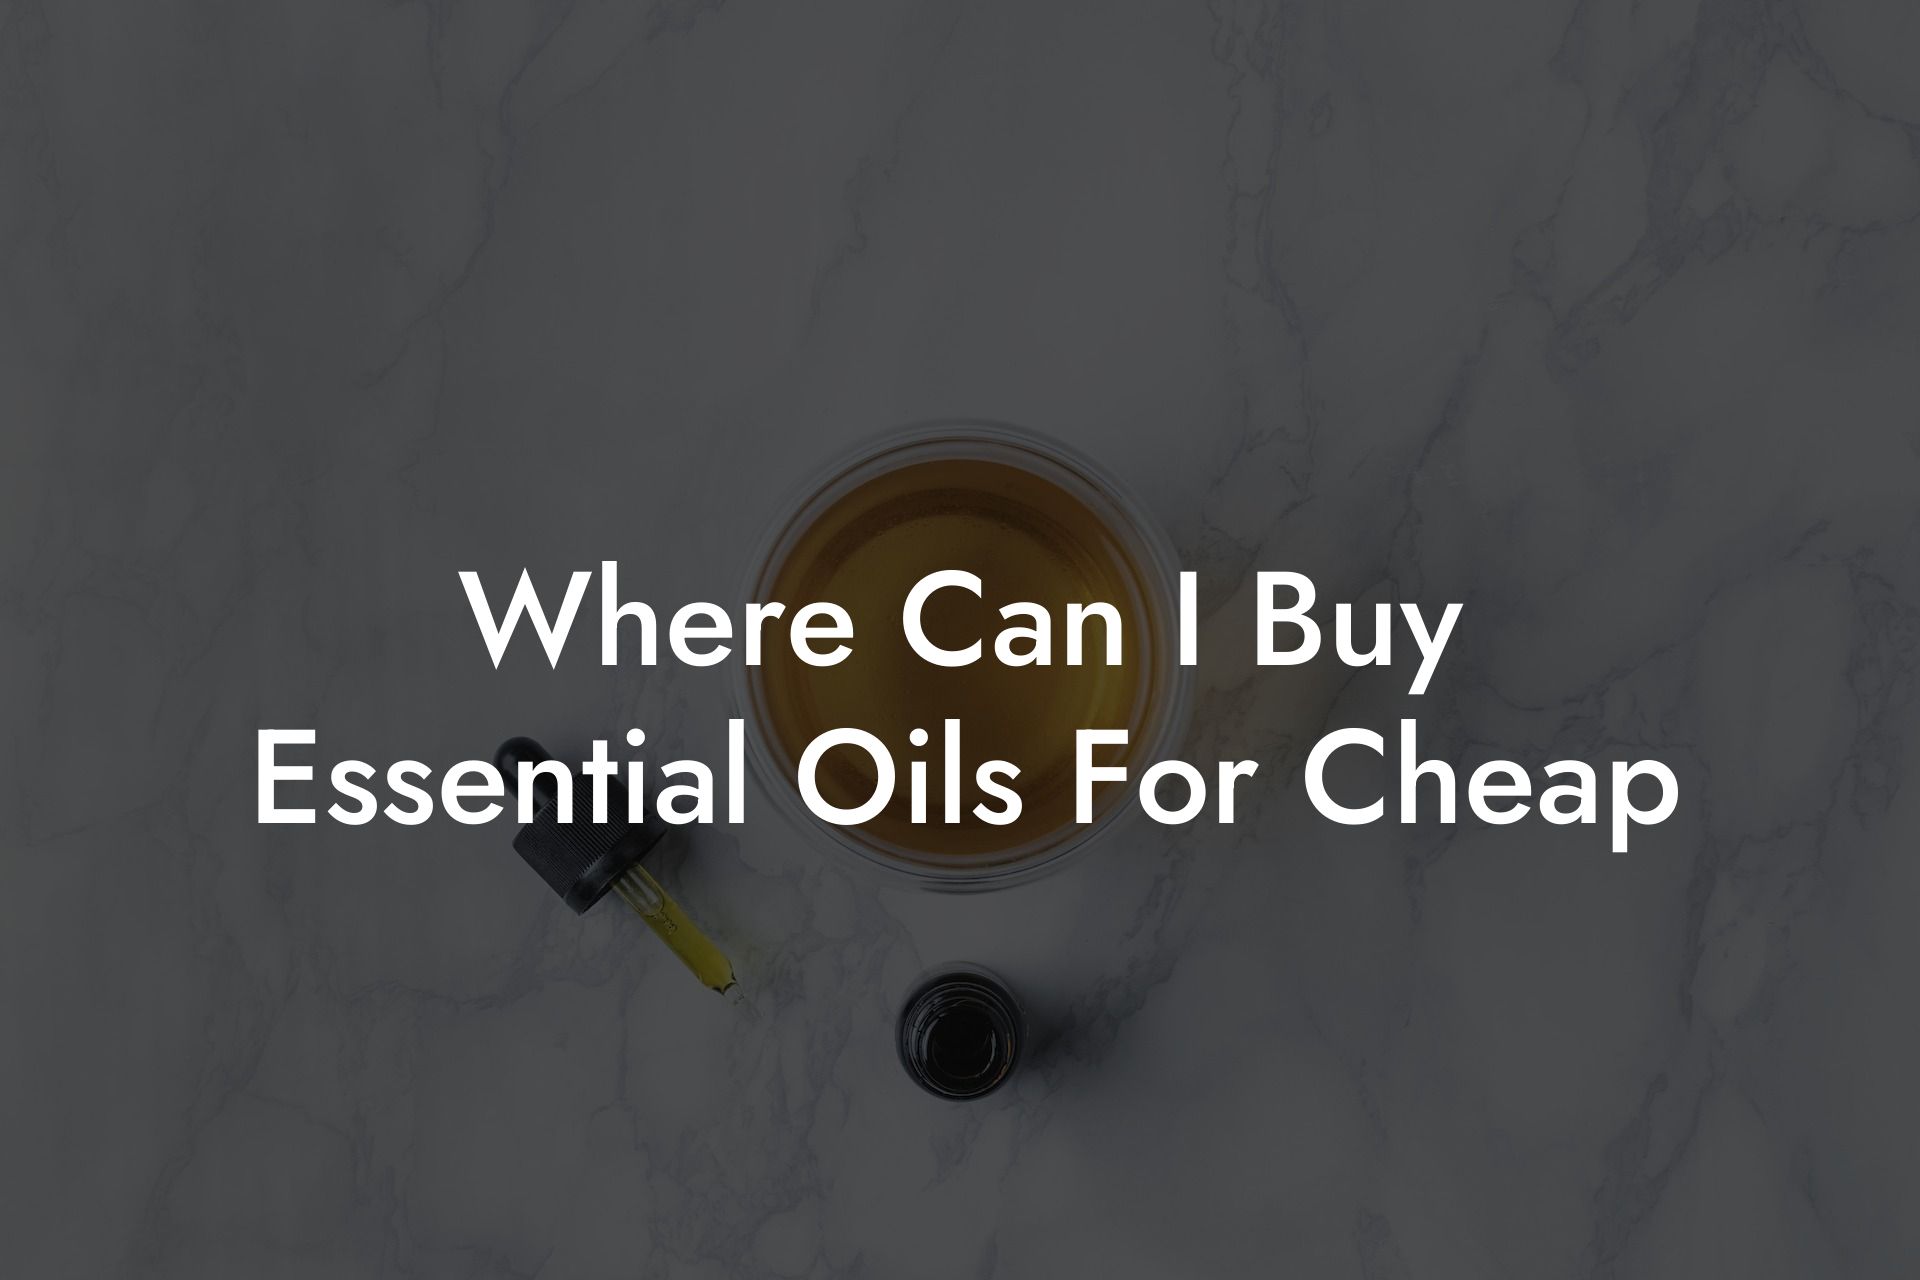 Where Can I Buy Essential Oils For Cheap